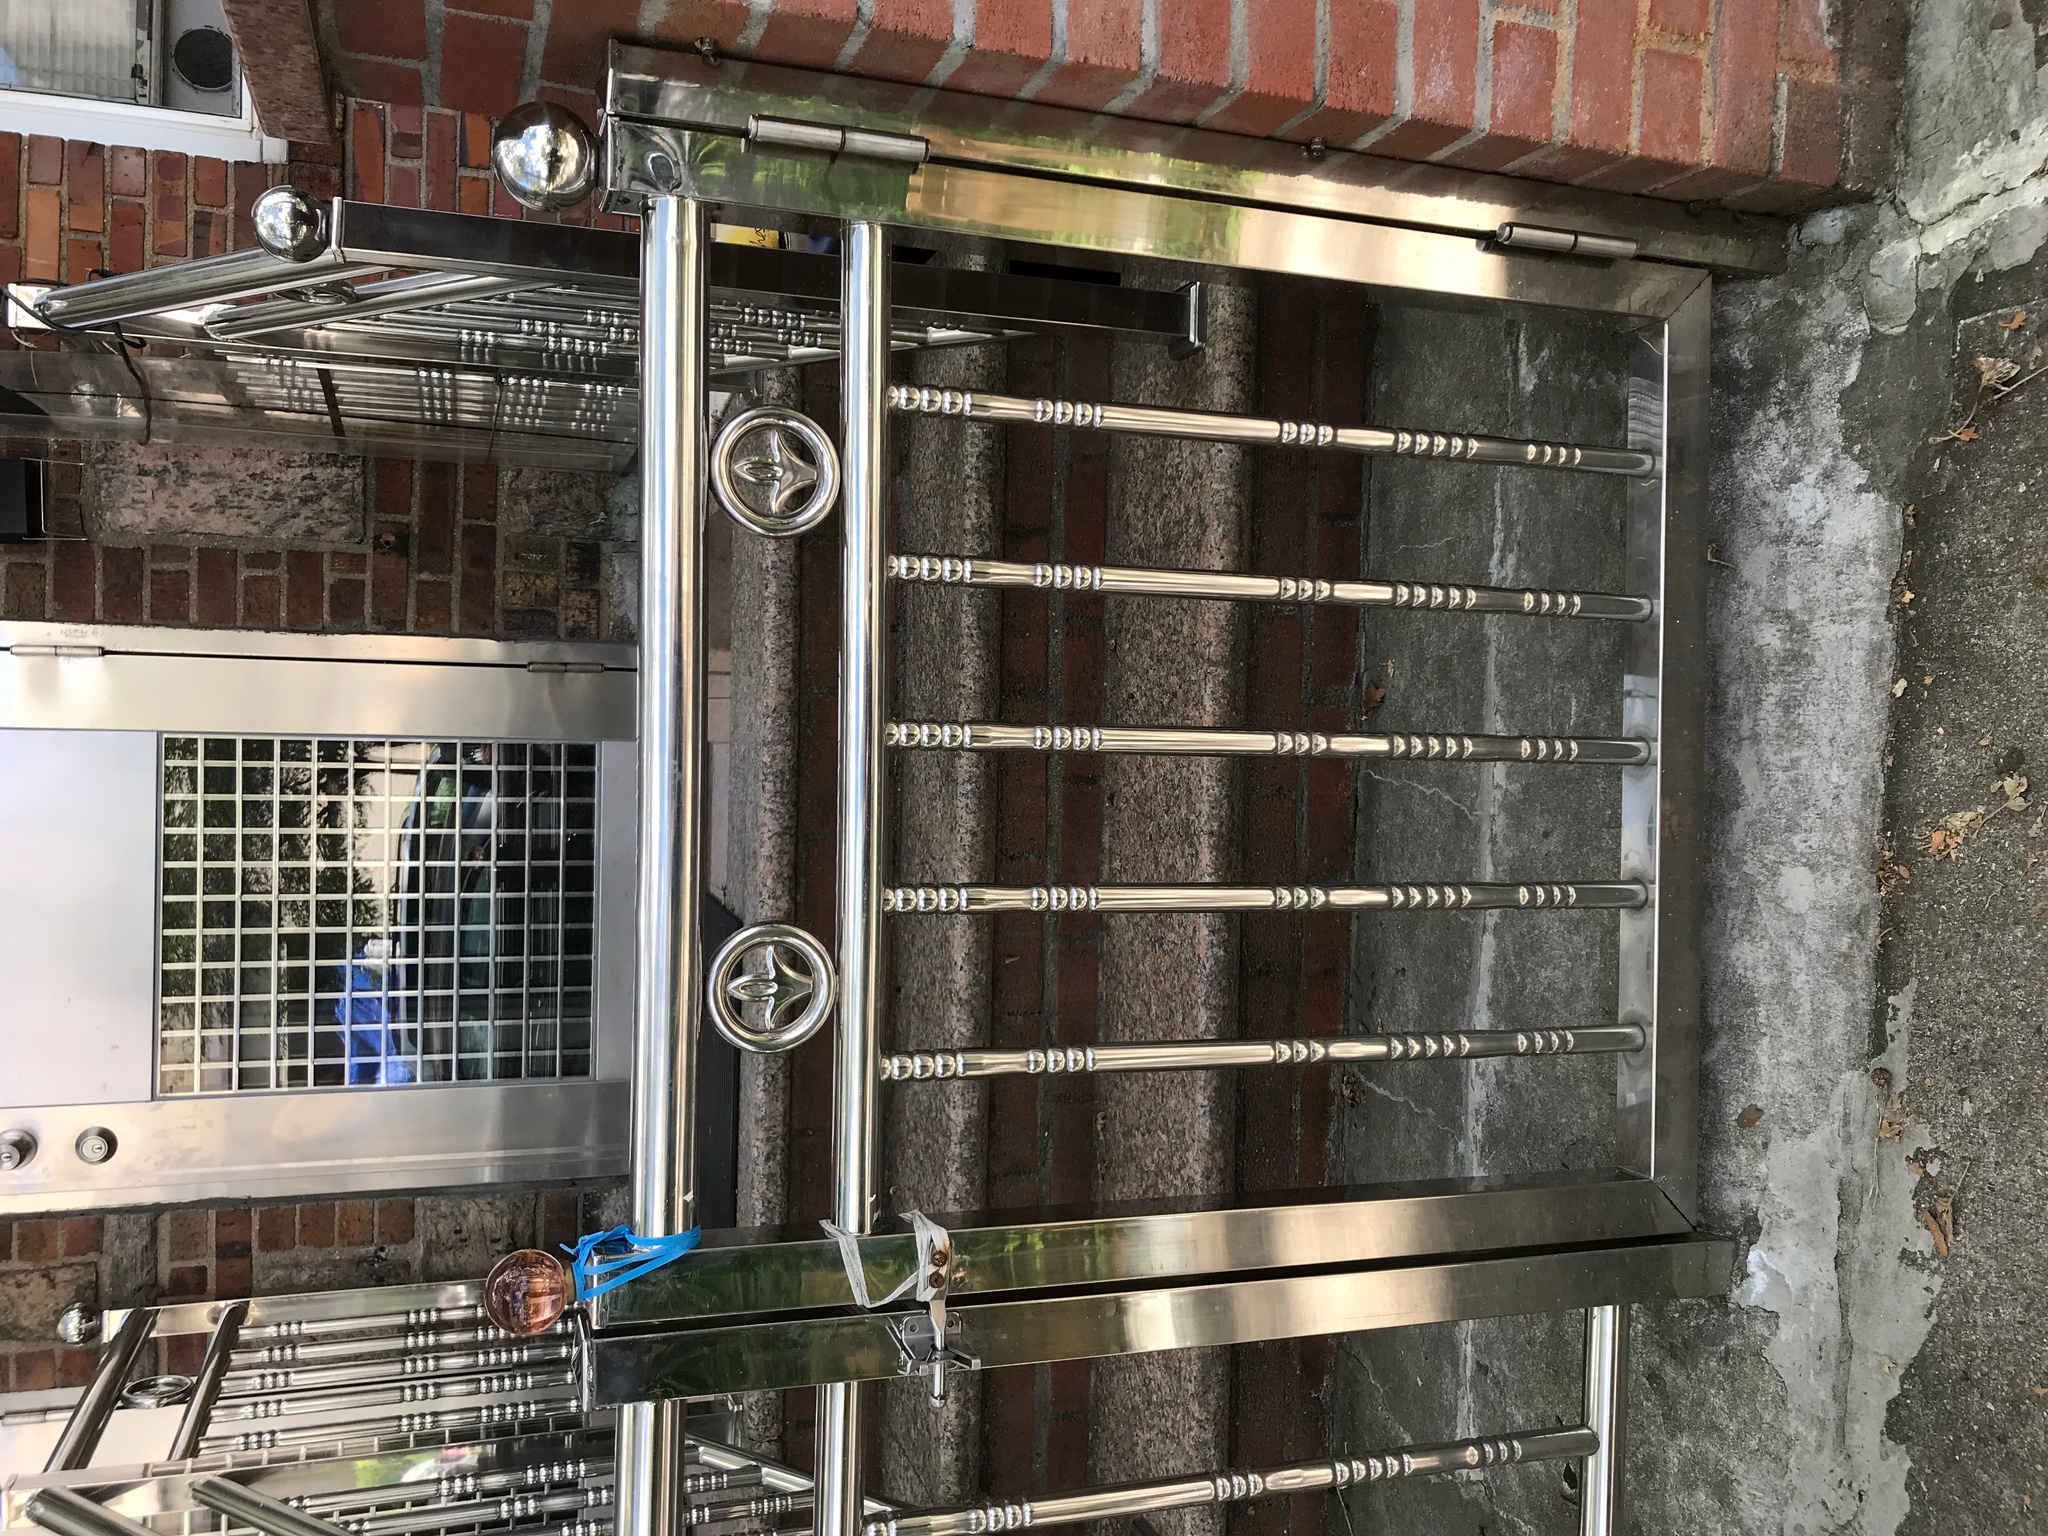 A shiny stainless steel gate with behind it up three marble stairs, a shiny stainless steel banister and railing leads to a stainless steel front door of a brick house